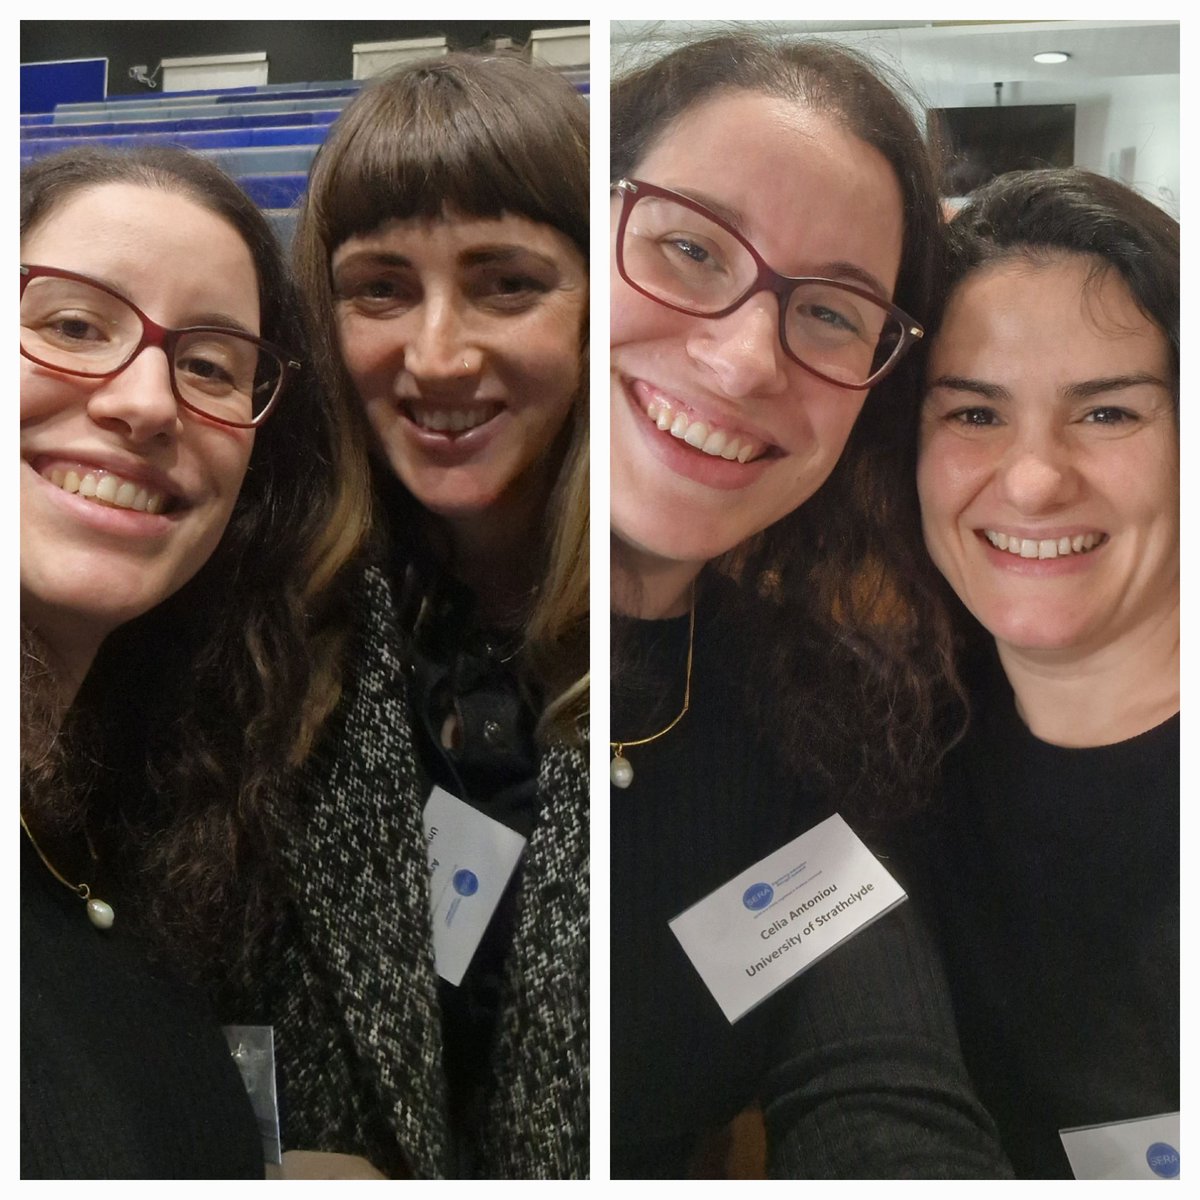 ✨️Lovely catching up with amazing @StrathEDU and former colleagues at the @SERA_Conference #seraconf23!! Looking forward to future collaborations and discussions 💫 #SERApeople (@anna_d_beck @EneidaLinguist @stnikou)